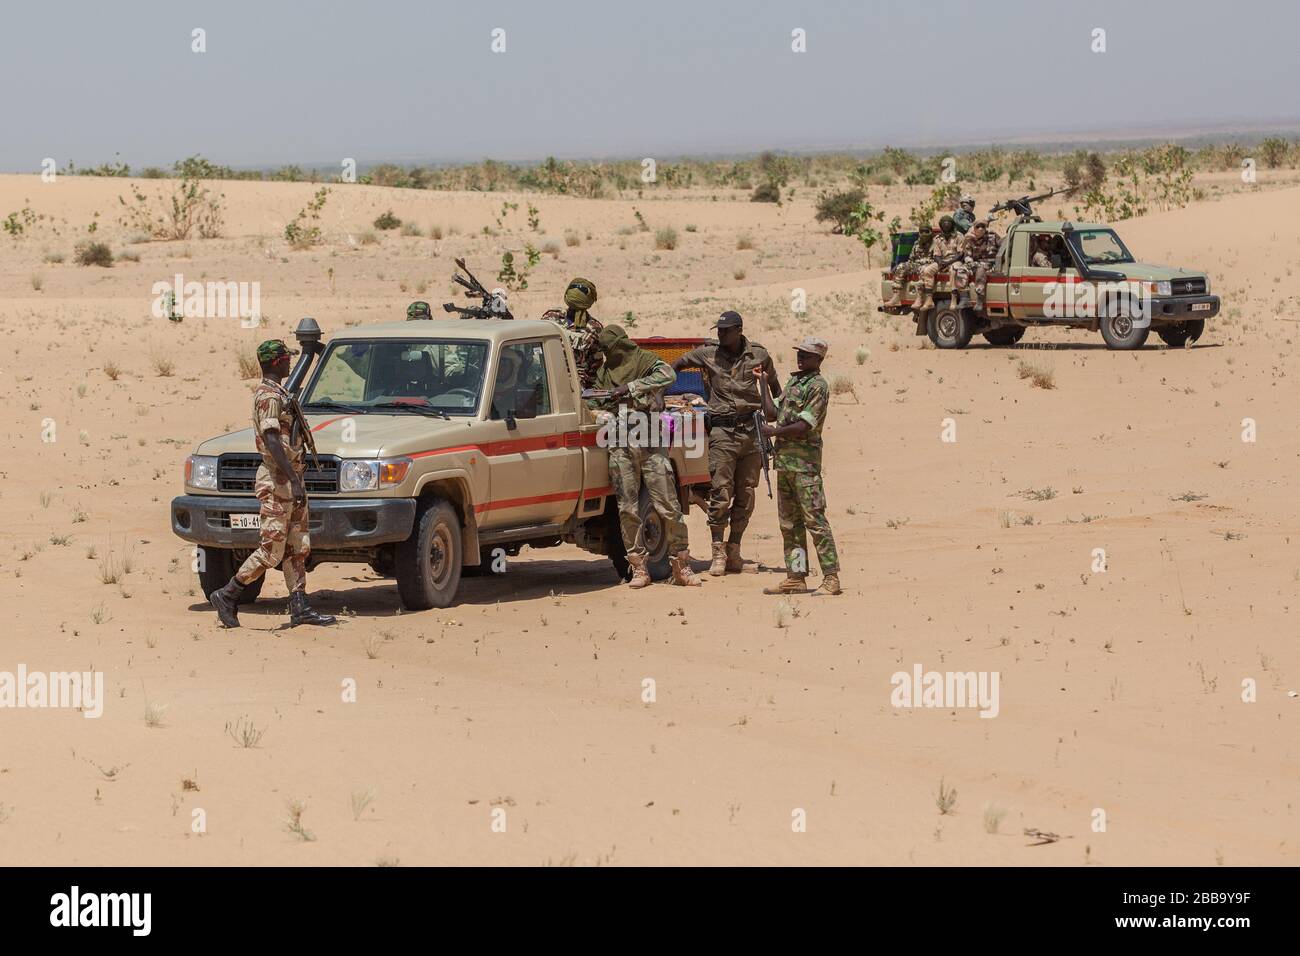 Niger: Governmental military guard in North Africa Cars with armed soldiers desert  border Libya Niger Stock Photo